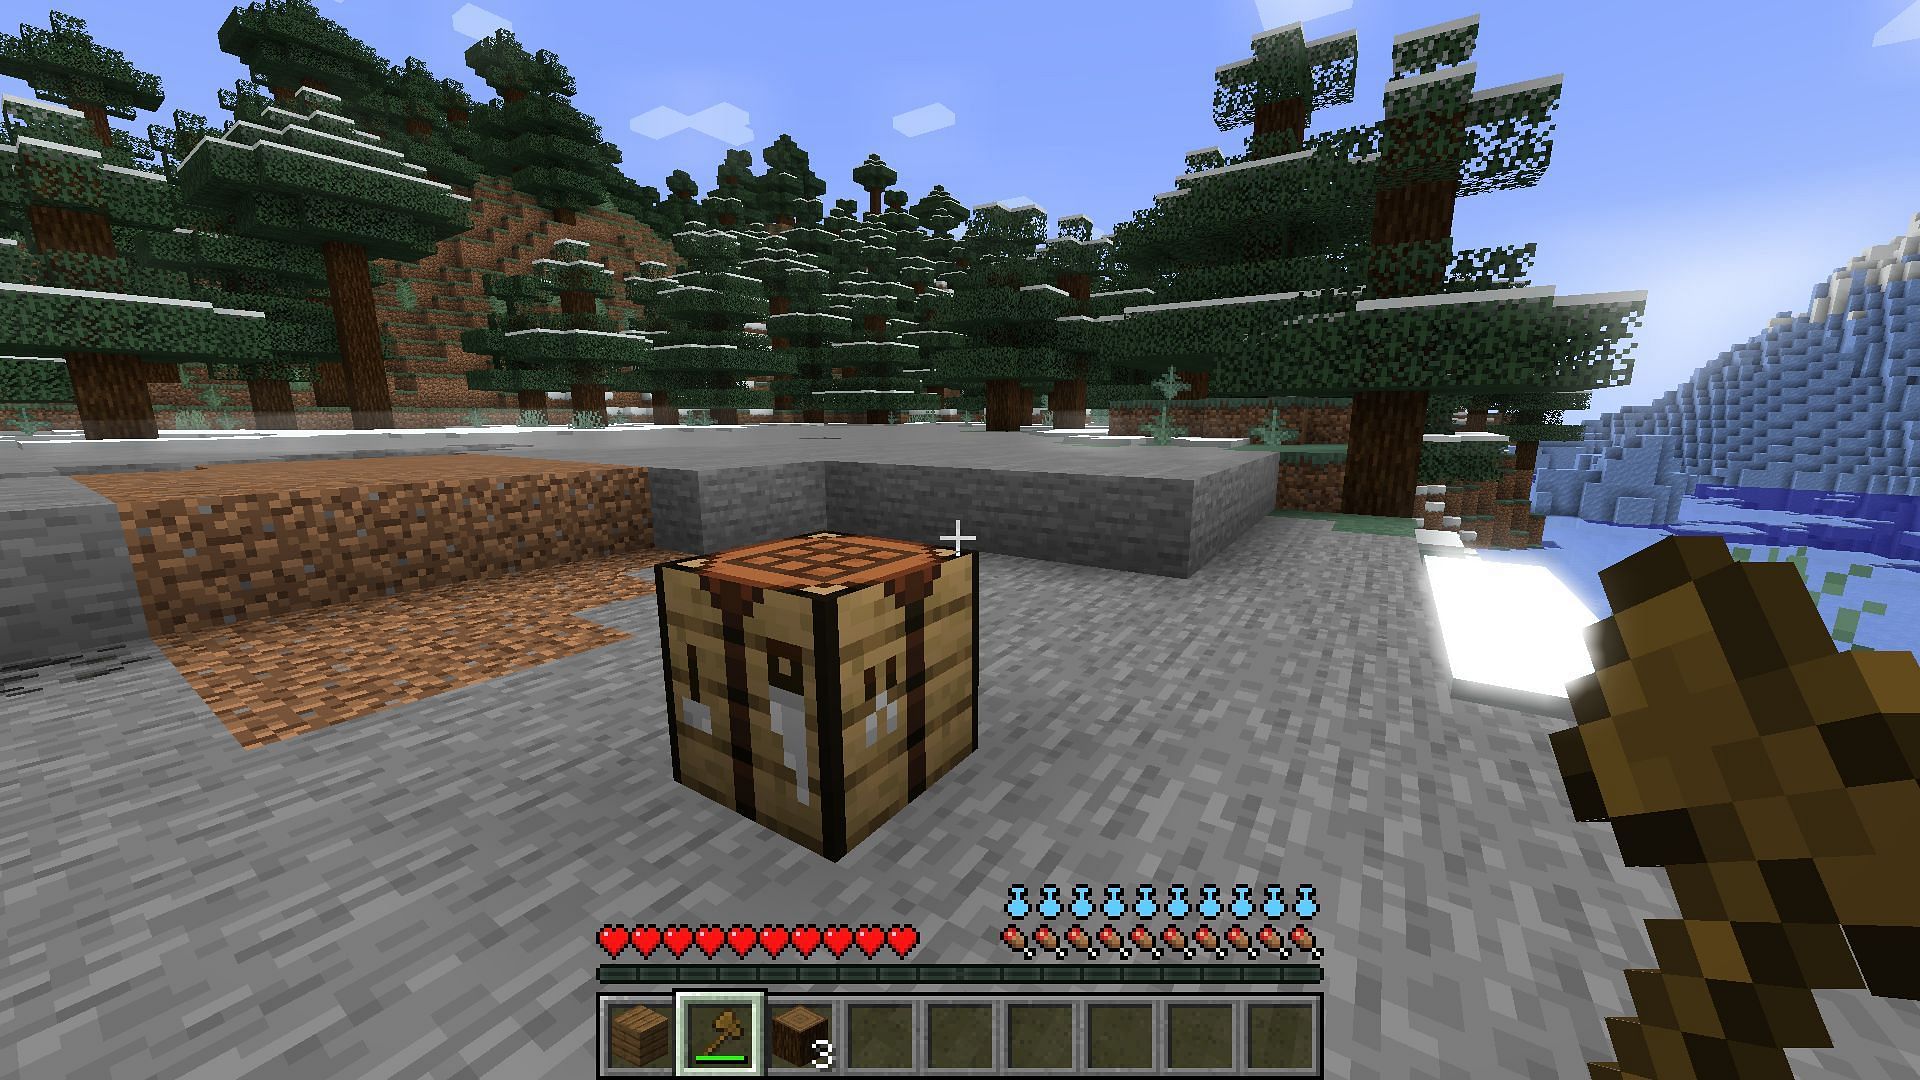 Players will stroll if they have heavy items in their inventory and even have a hydration bar in Minecraft (Image via Mojang)